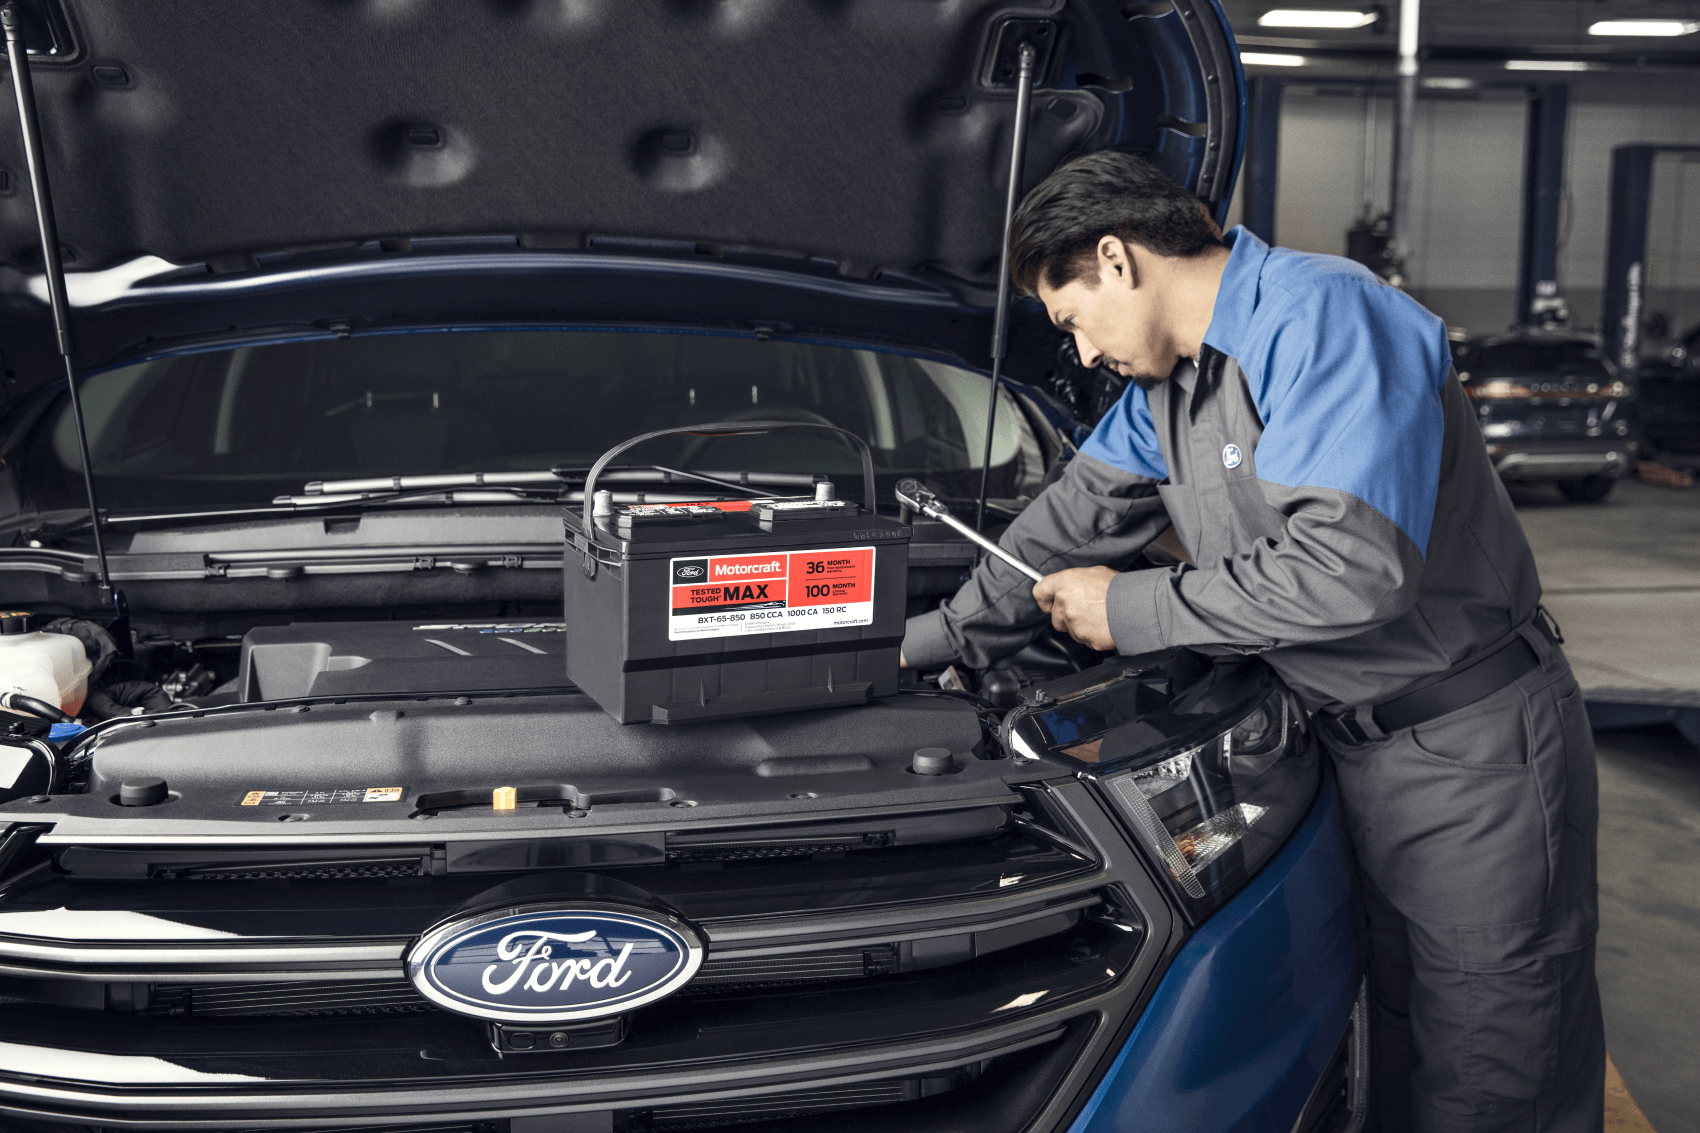 Ford Service and Repair Battery at Tunkhannock Ford near Pittston, PA